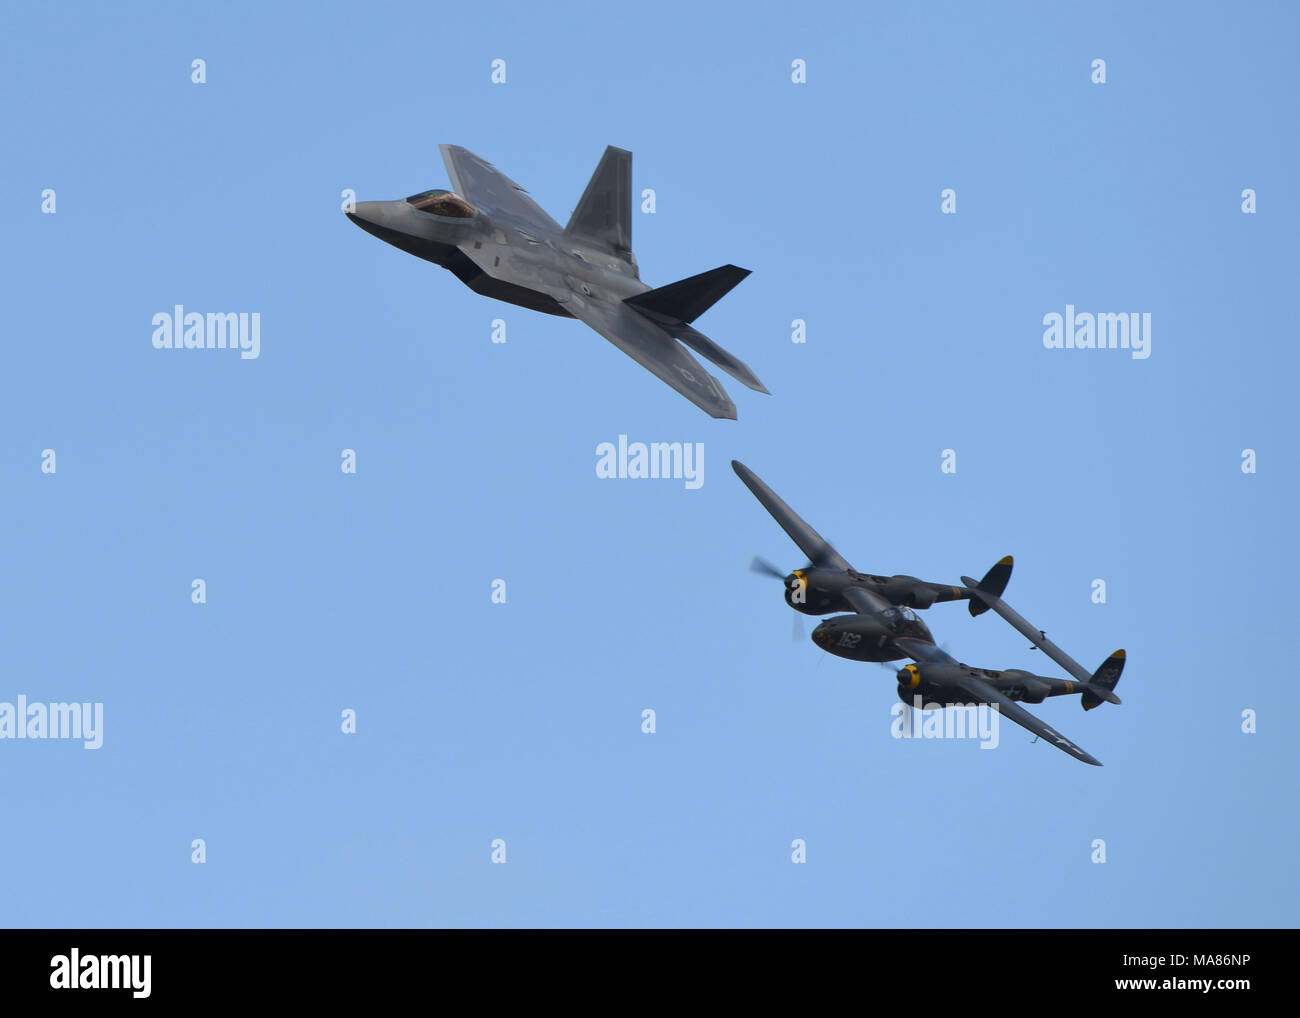 A U.S. Air Force F-22 Raptor flies alongside a P-38 Lightening during a Heritage Flight at the Los Angeles County Air Show in Lancaster, Calif., March 24, 2018. Heritage Flight educates those about the fighter aircraft from World War II, Korea and Vietnam while honoring veterans who flew them. (U.S. Air Force photo by Senior Airman Kaylee Dubois) Stock Photo